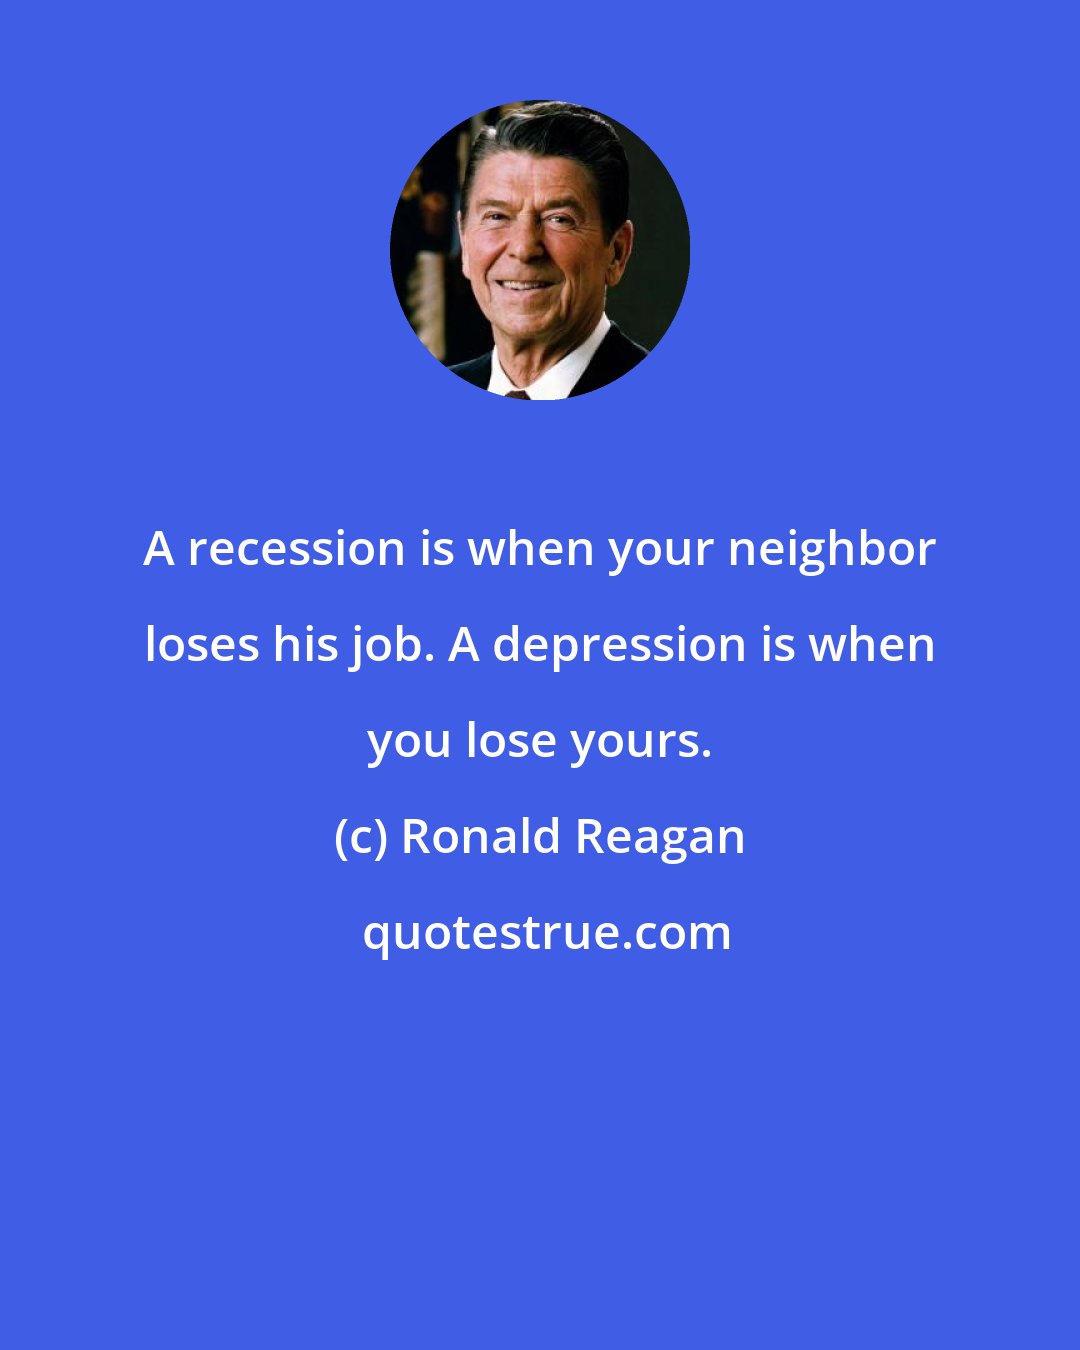 Ronald Reagan: A recession is when your neighbor loses his job. A depression is when you lose yours.